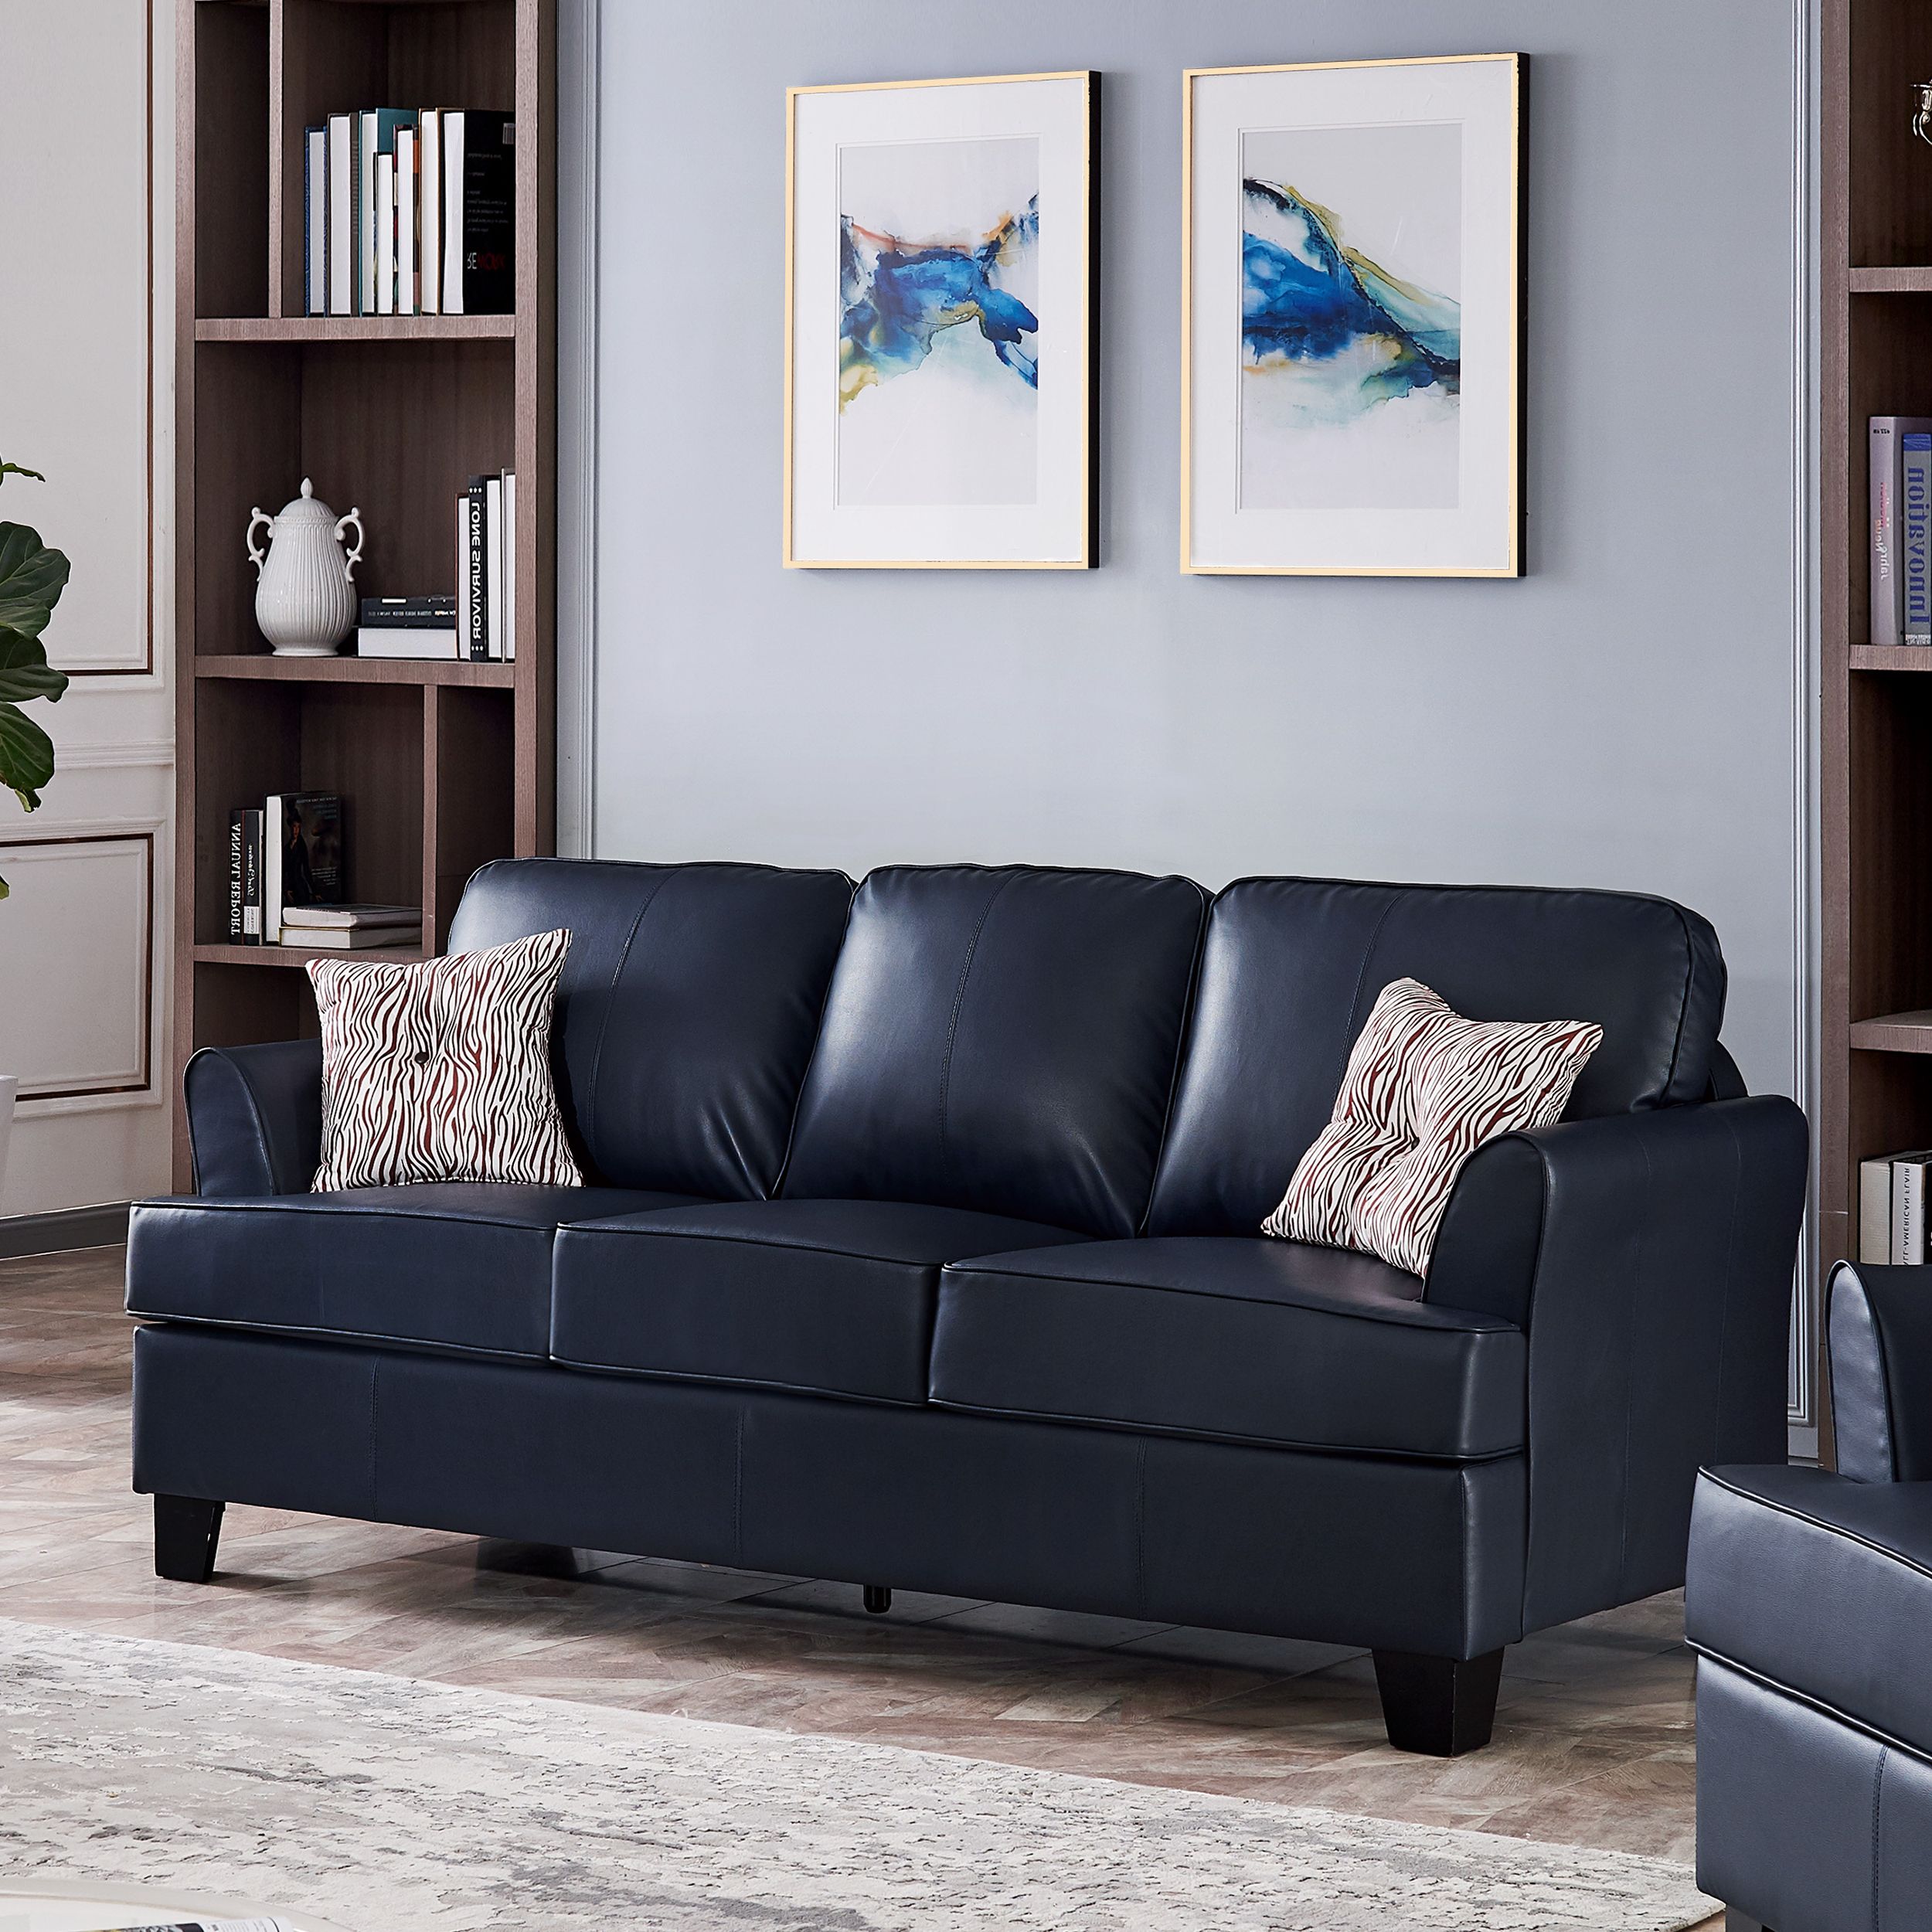 Alexandria Leather Sofa (blue) – Taf Furniture For Sofas In Blue (View 10 of 20)